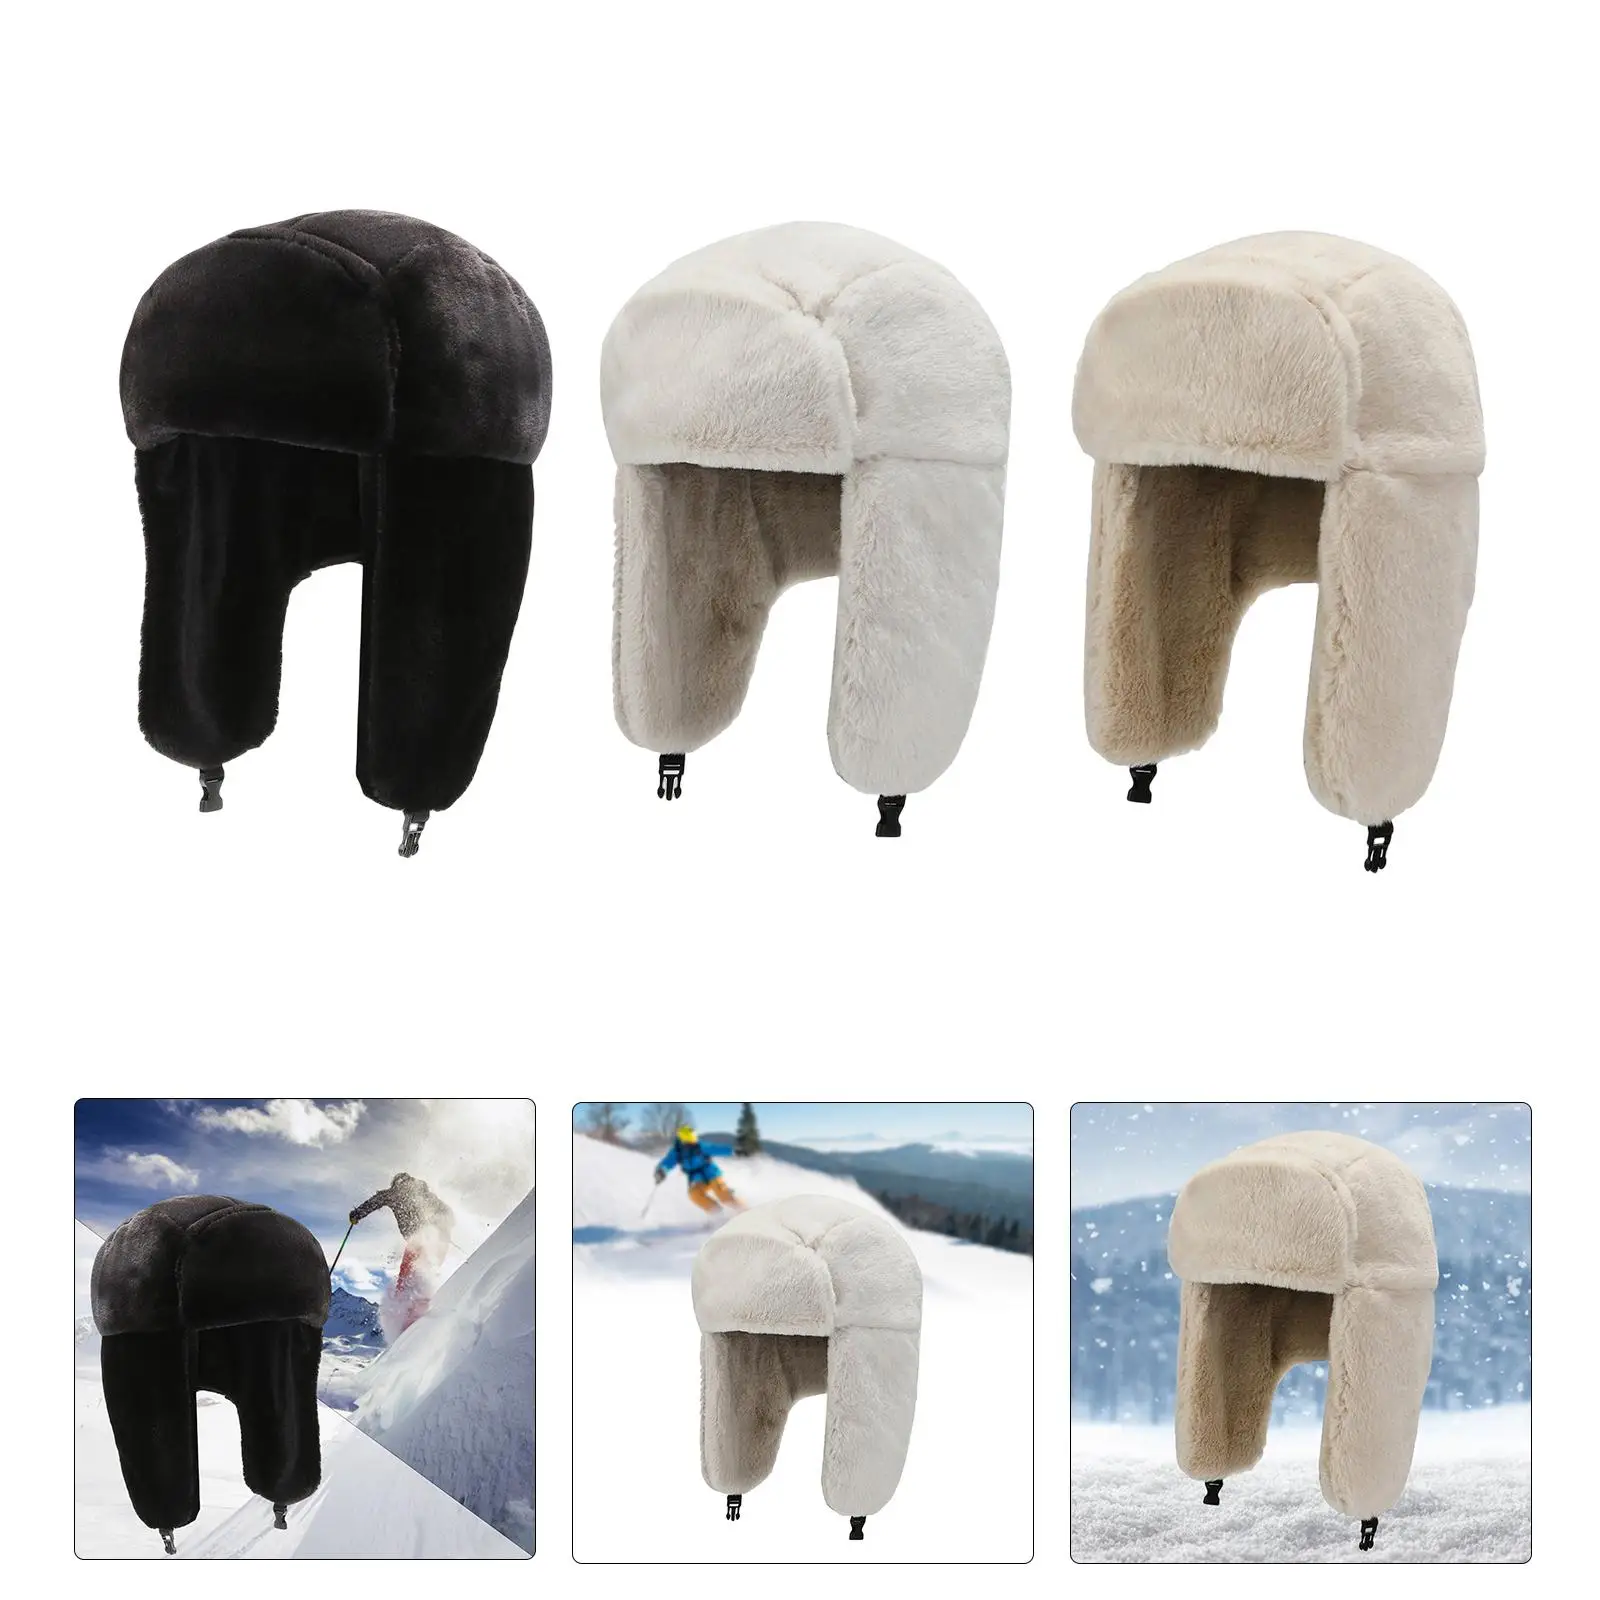 Winter Trooper Hat Bomber Hats with Ear Flaps Thermal Ski Hat Hat Winter Warm Hat for Unisex Keeping Warm Cycling Skateboard Ski